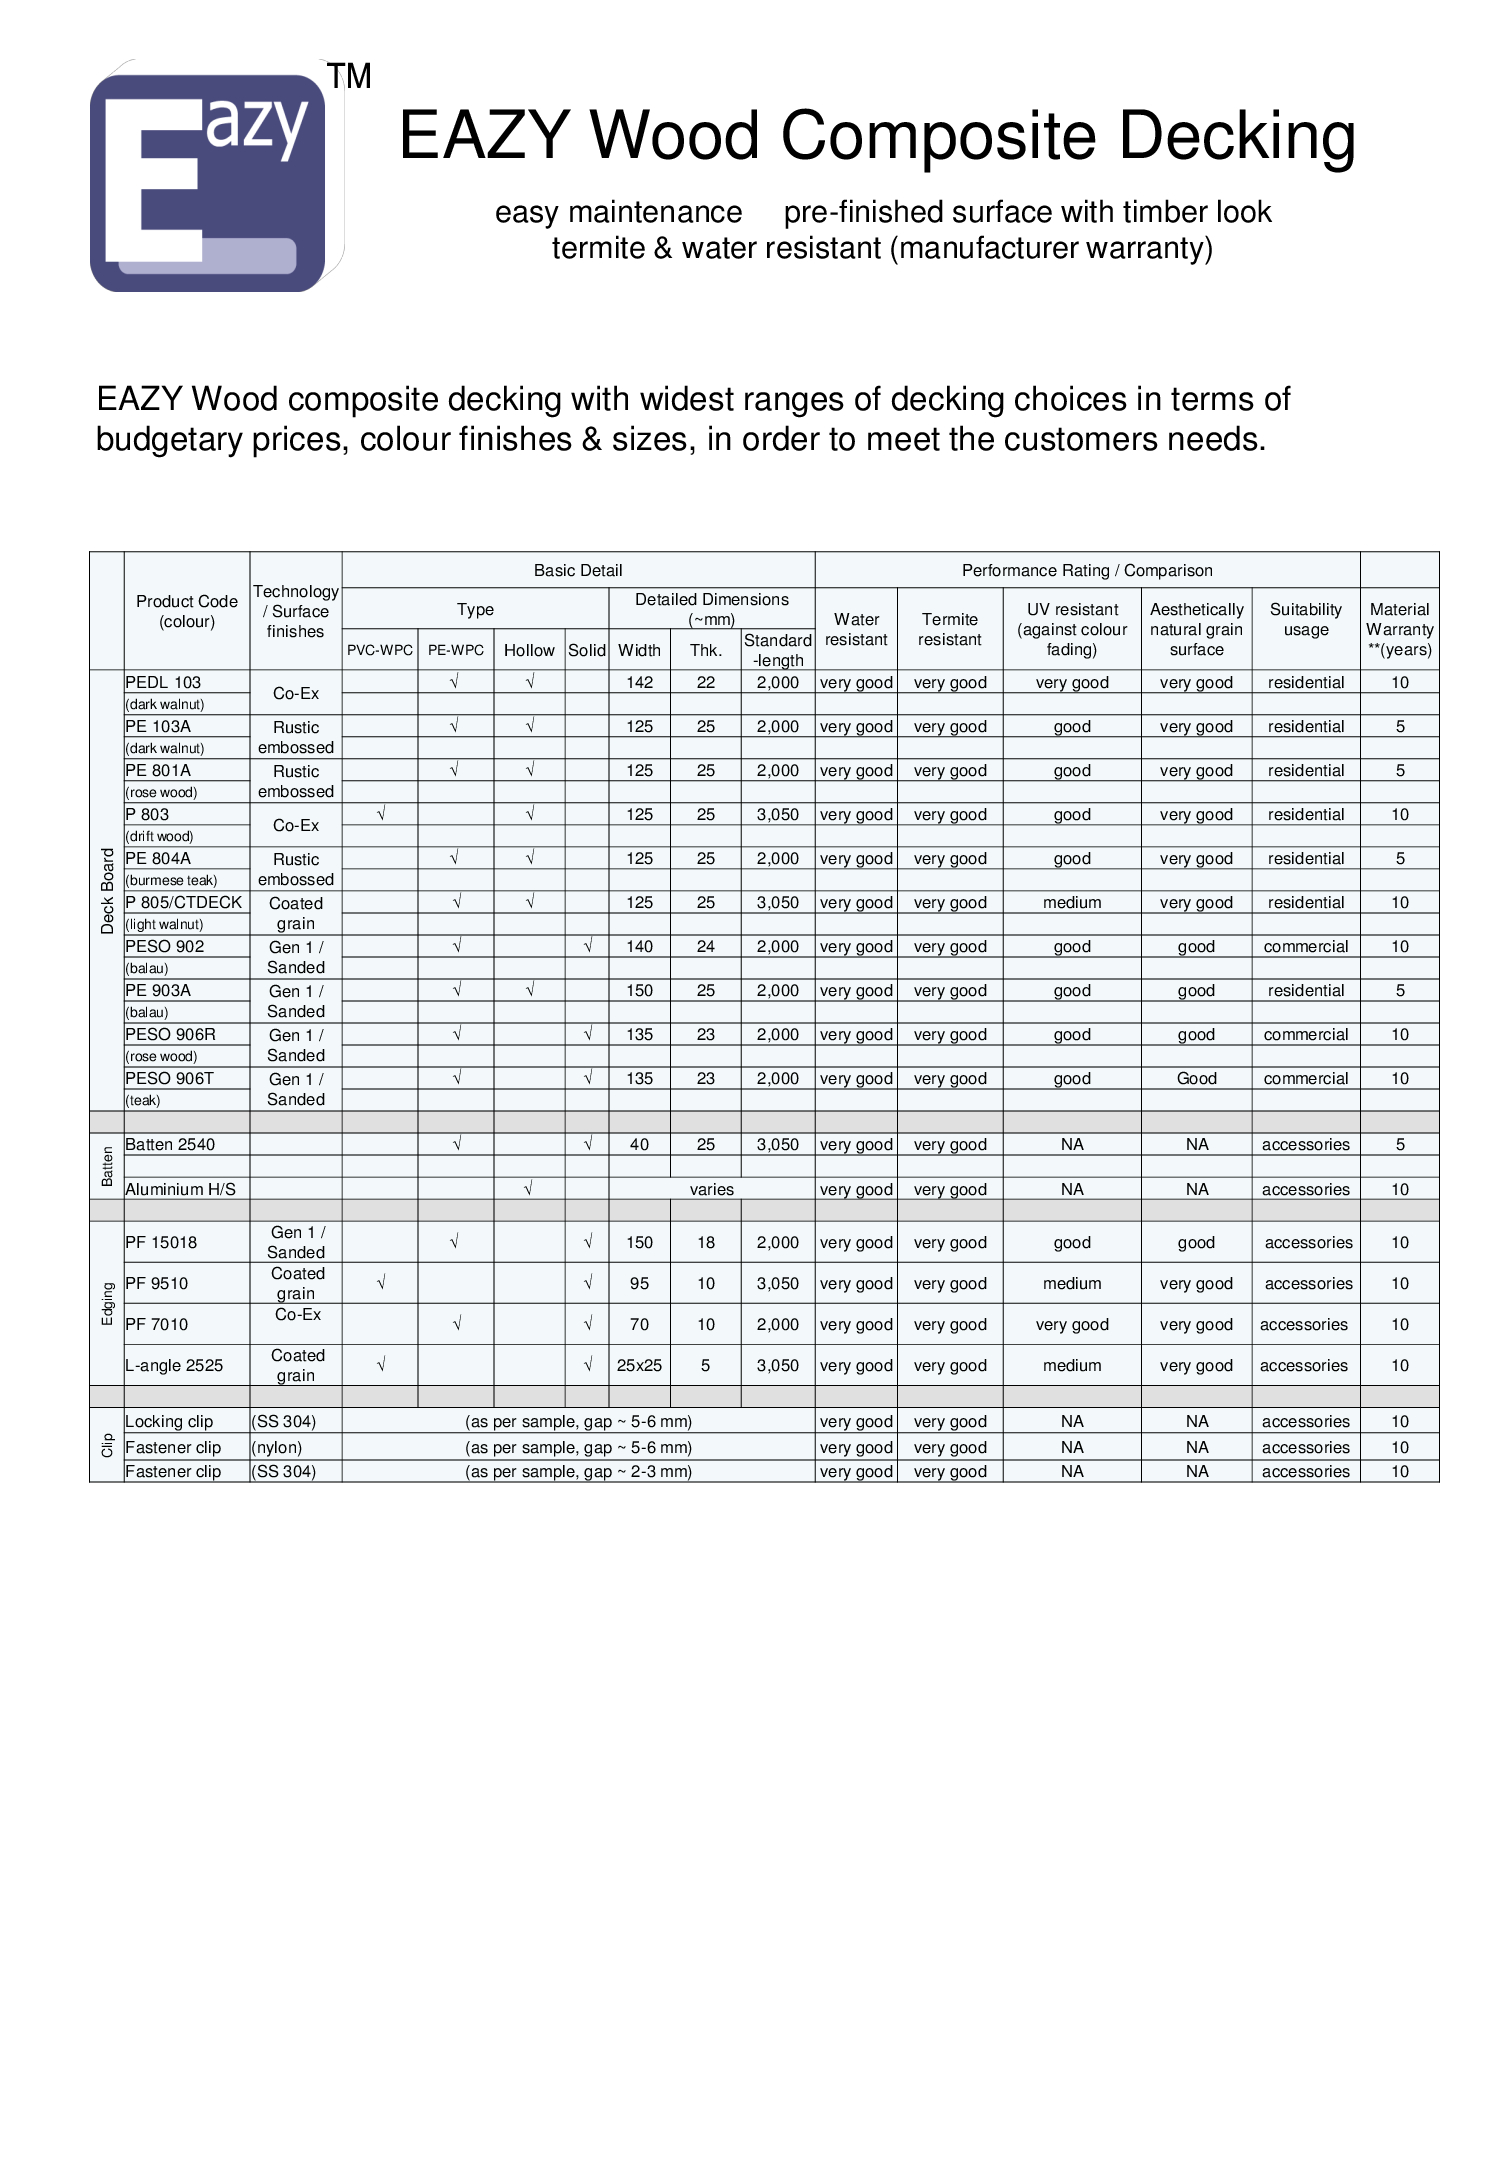 DECKING COMPARISON SUMMARY TABLE